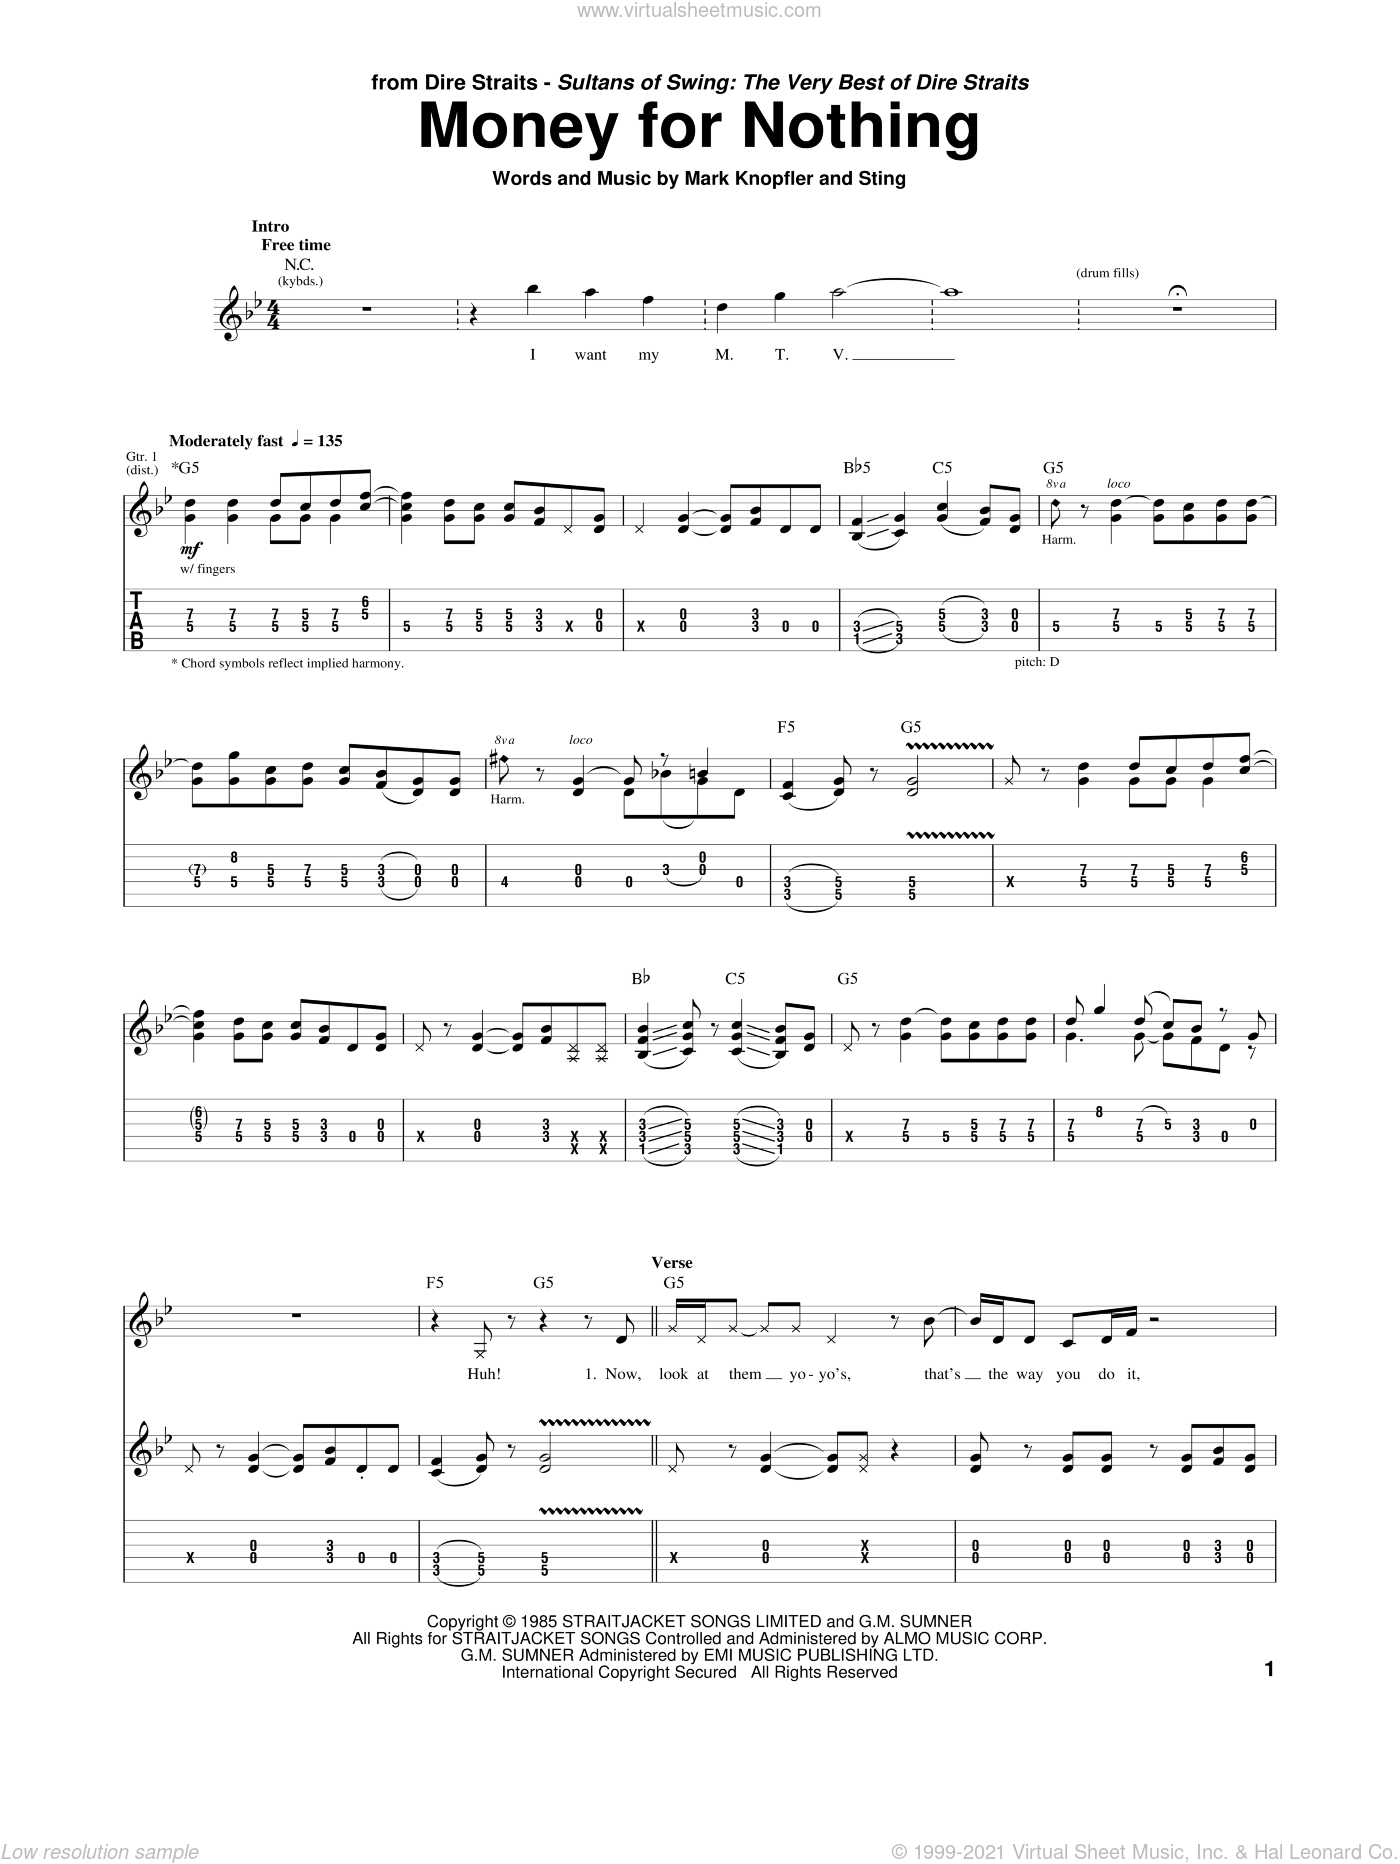 Why Worry by Dire Straits - Guitar Tab - Guitar Instructor